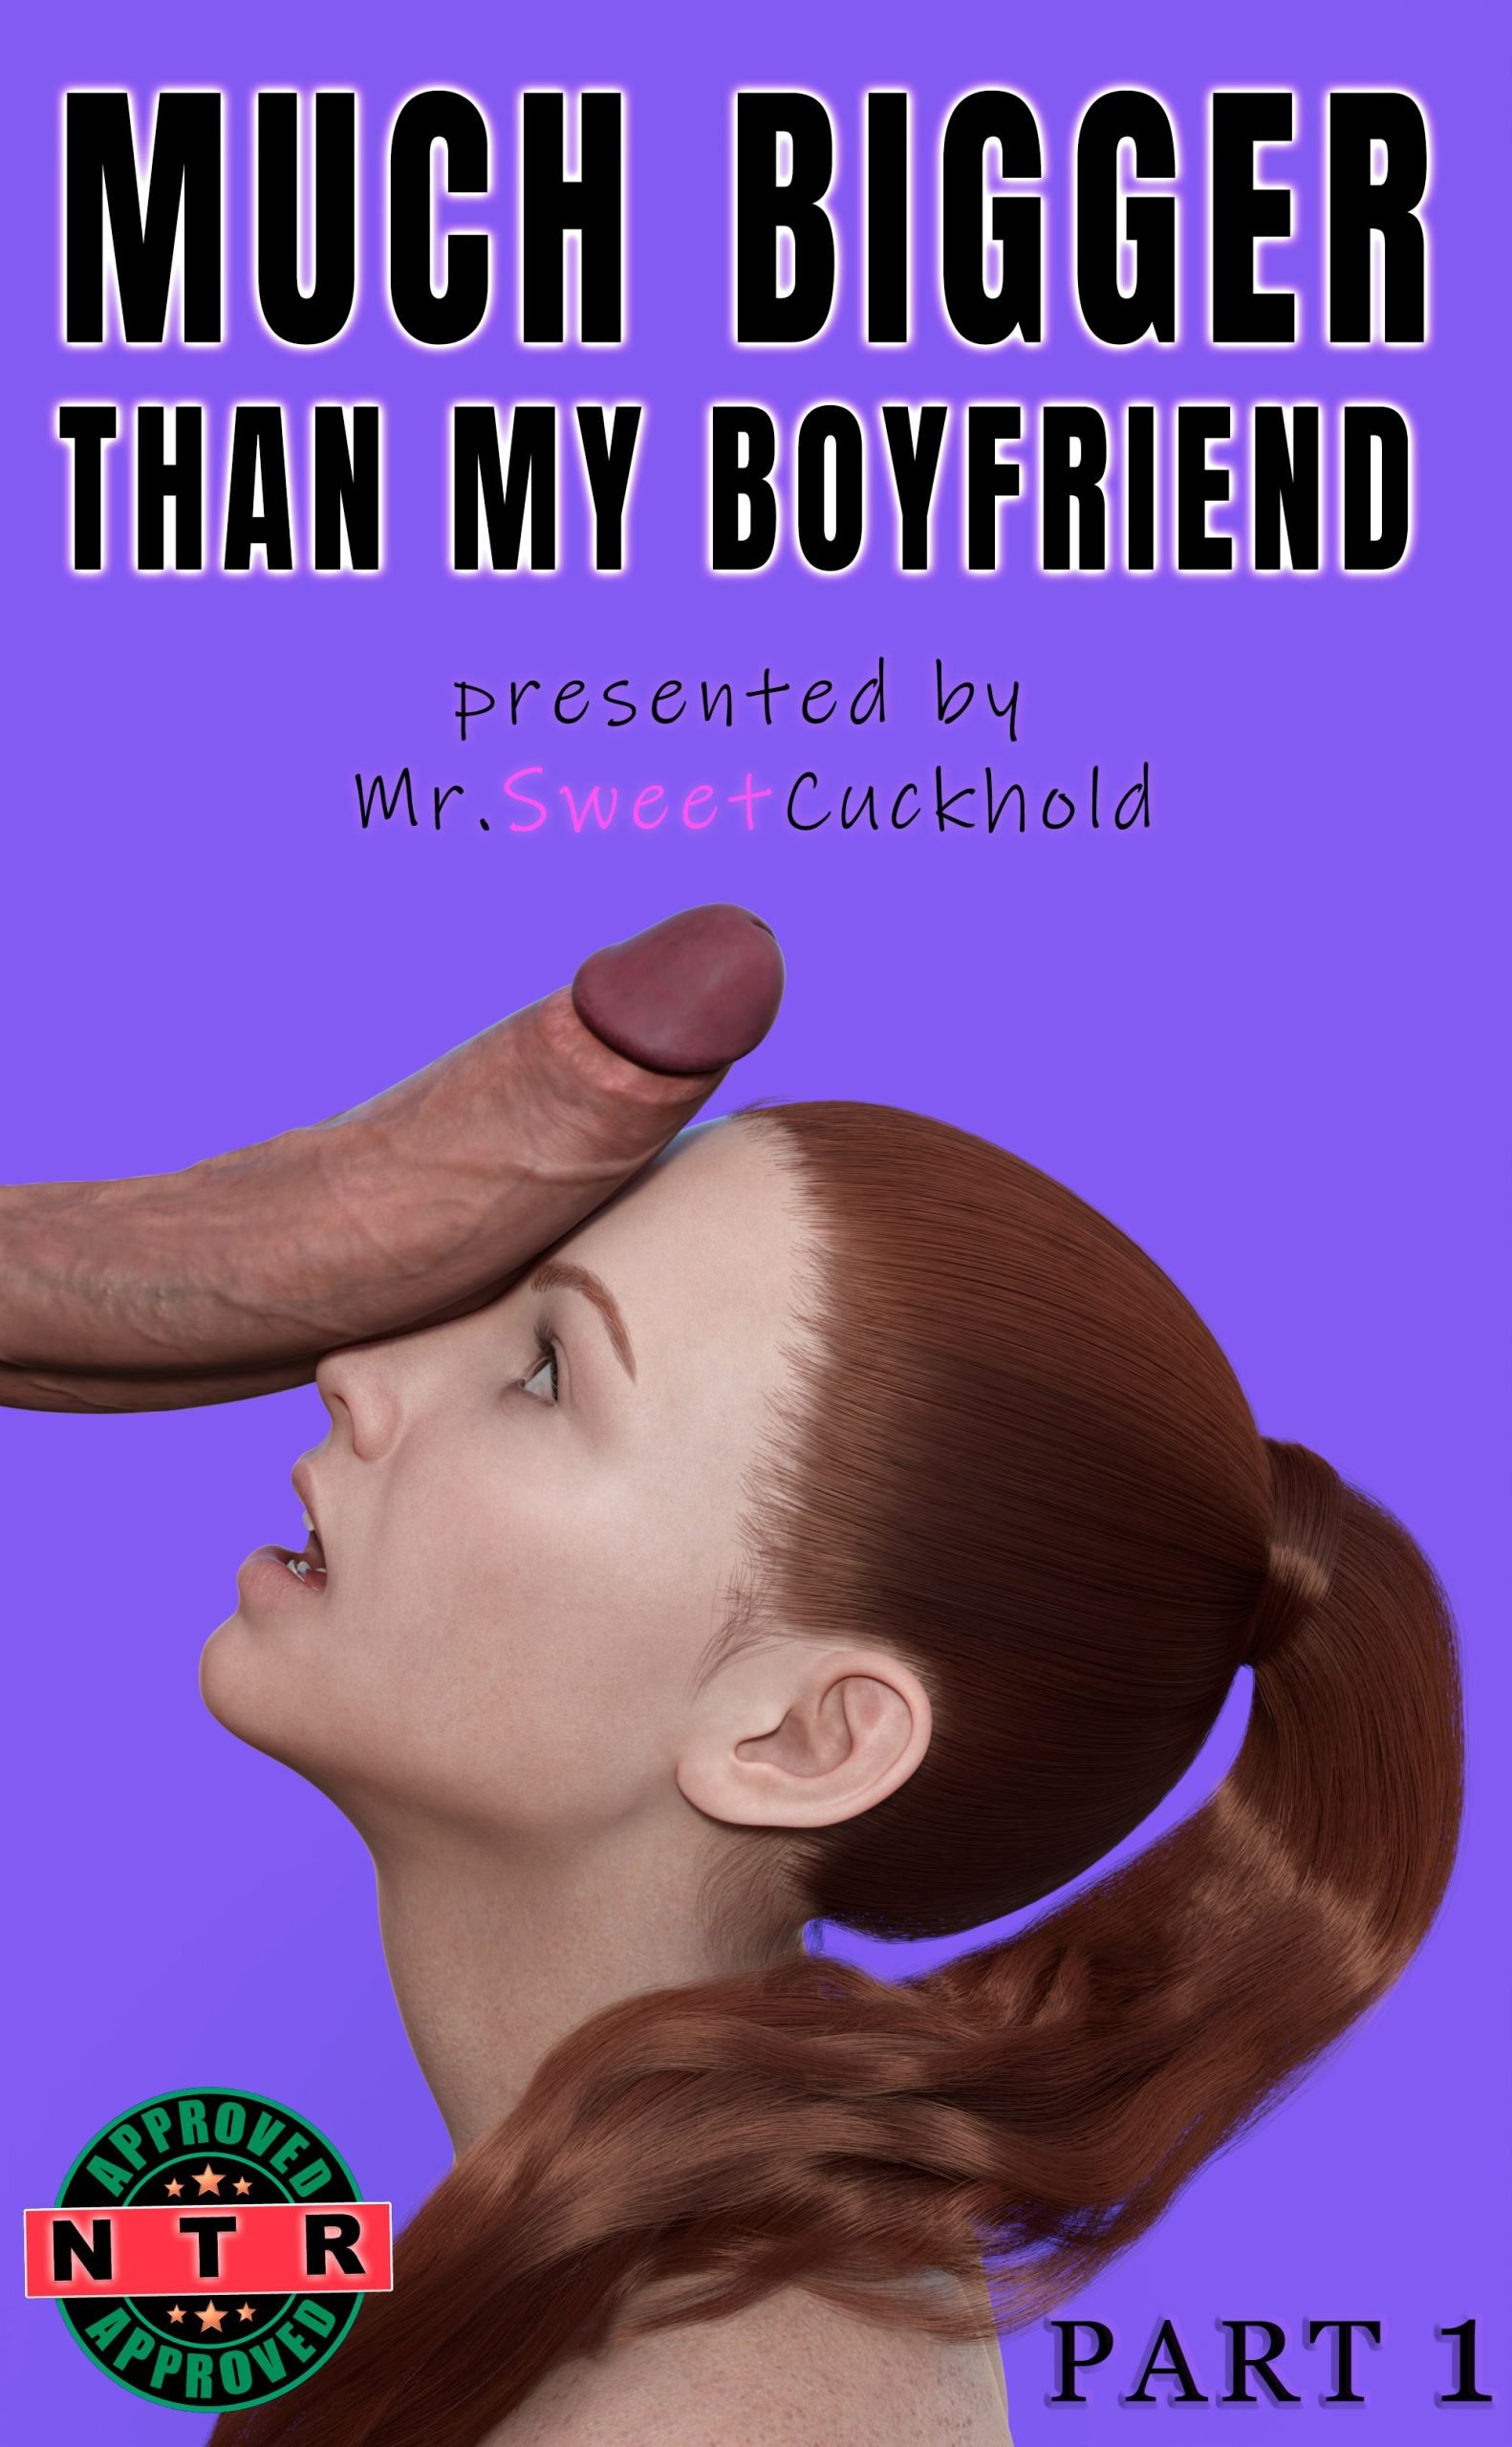 Much bigger than my boyfriend Mr.SweetCuckhold Porn Comic picture image